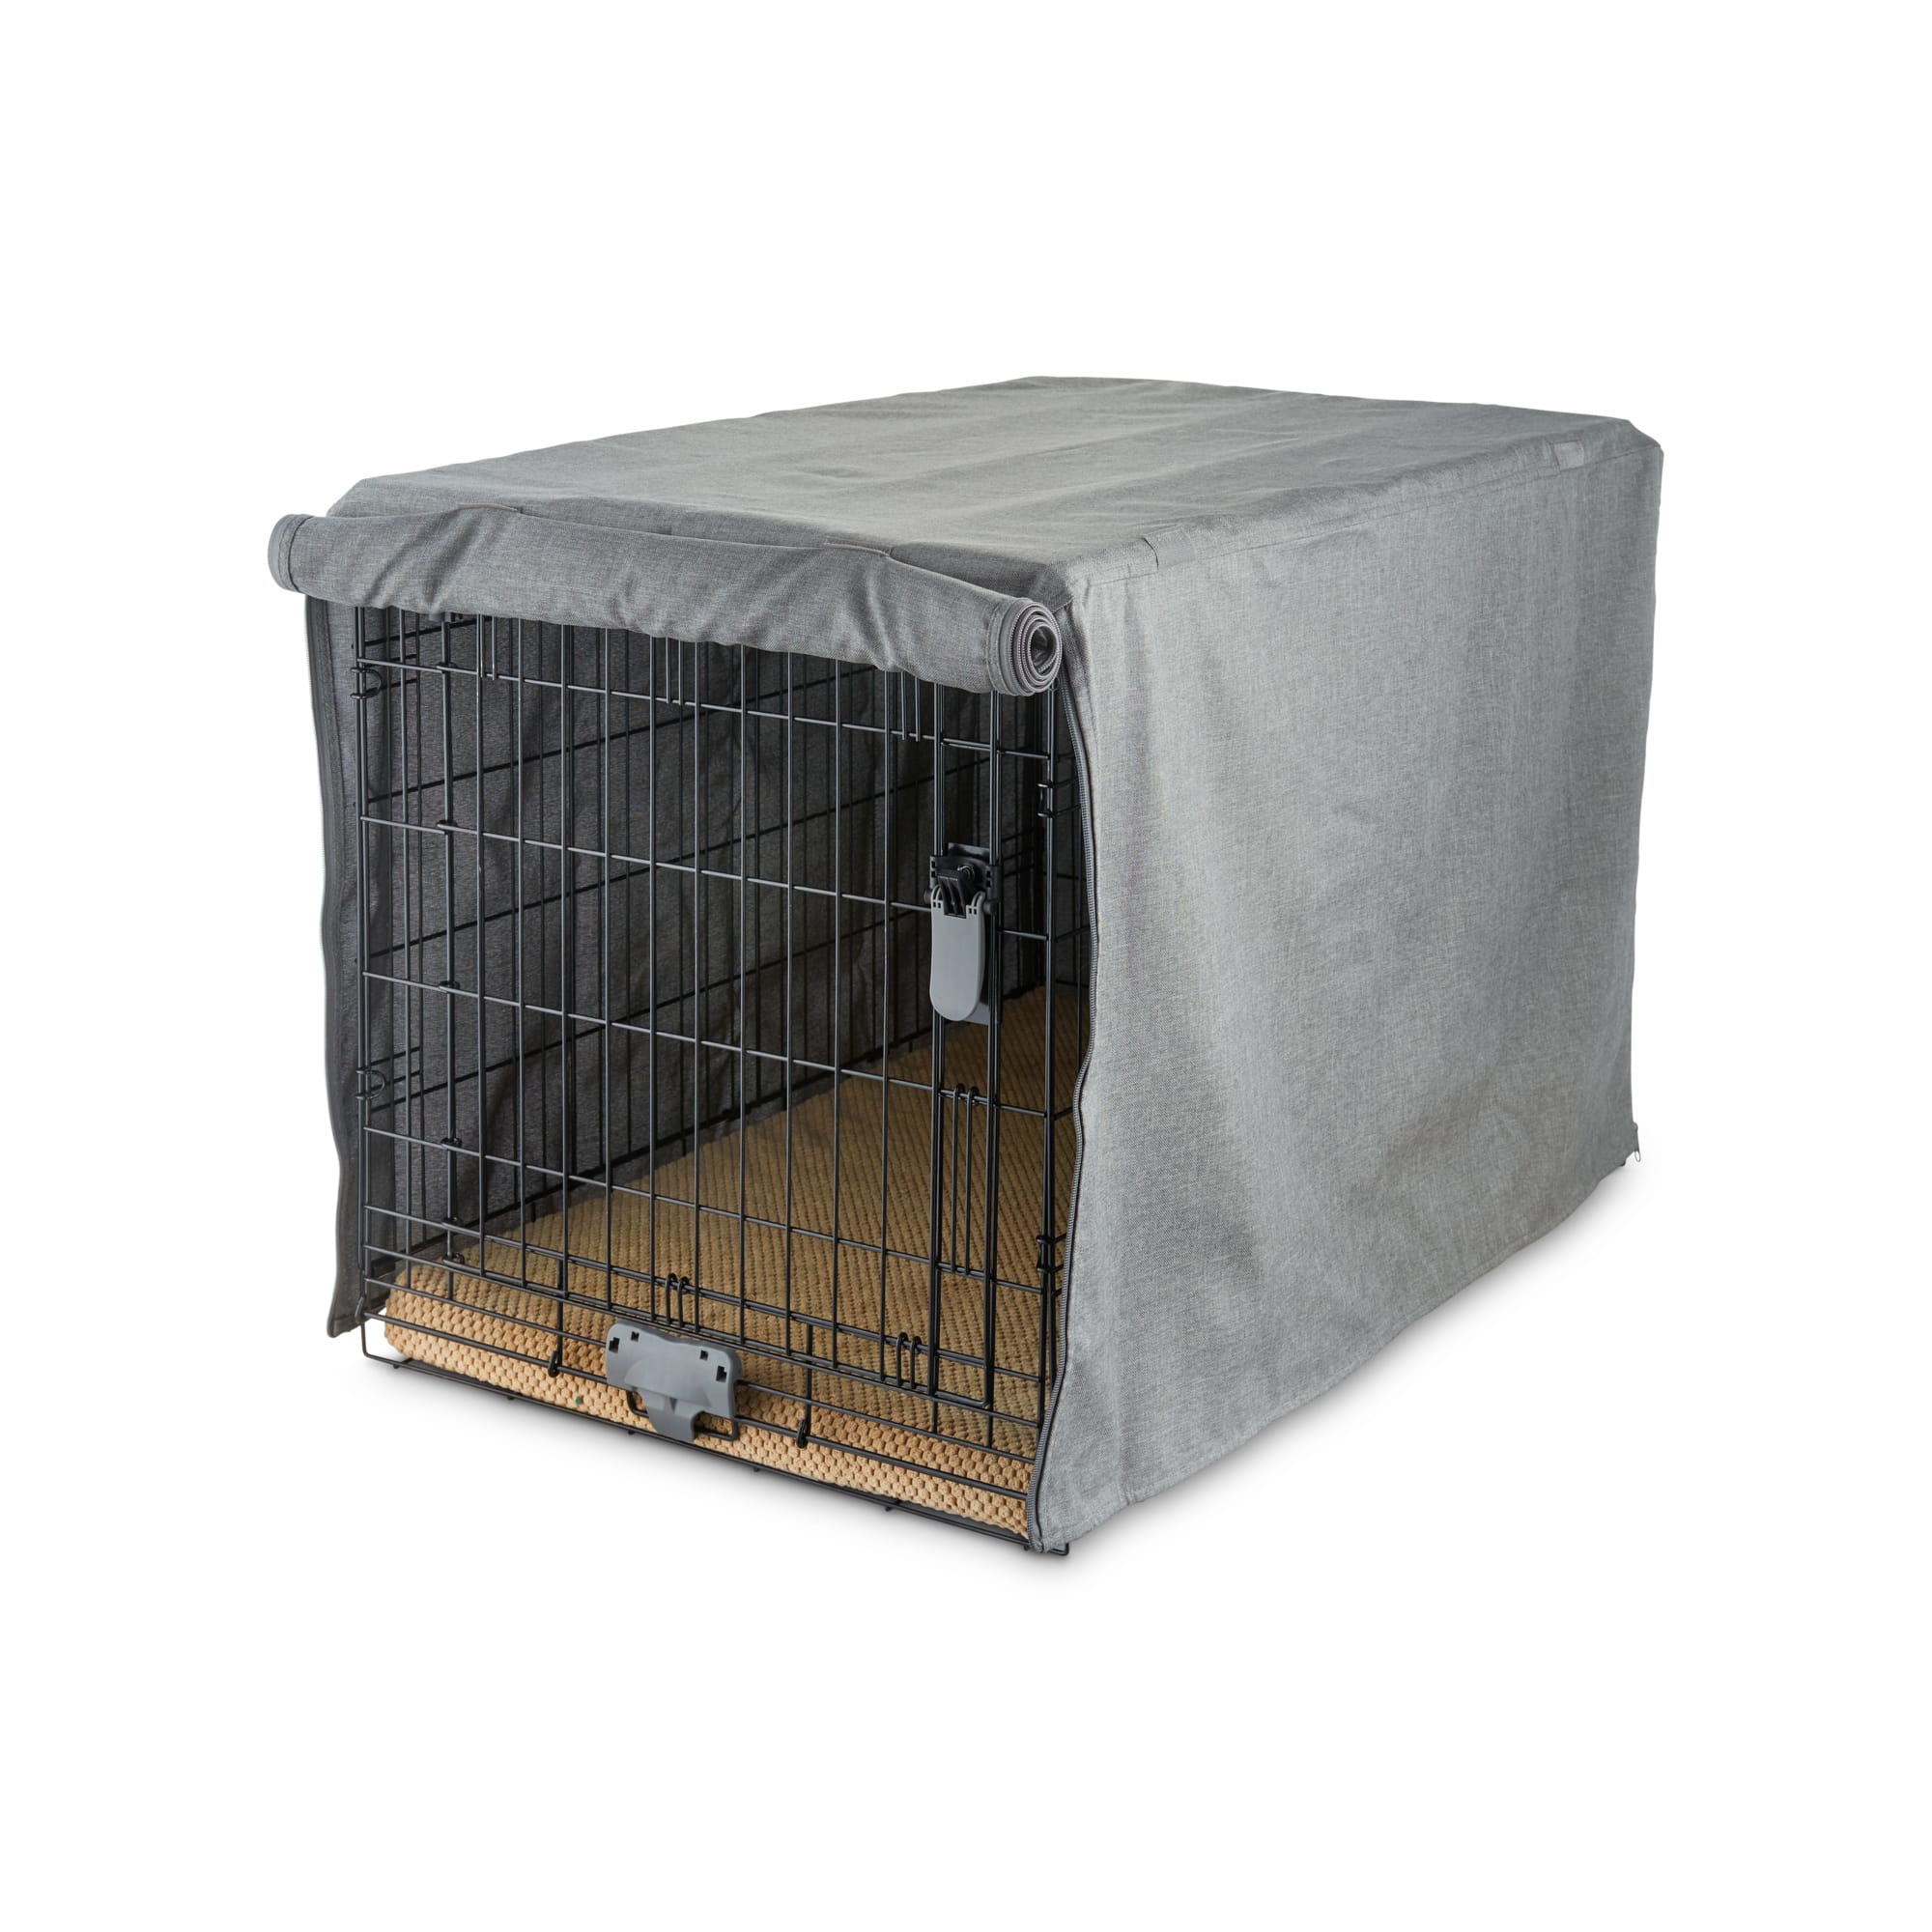 Quiet Night Time Den Like Security Black Opaque Dog Crate Cover Selections 